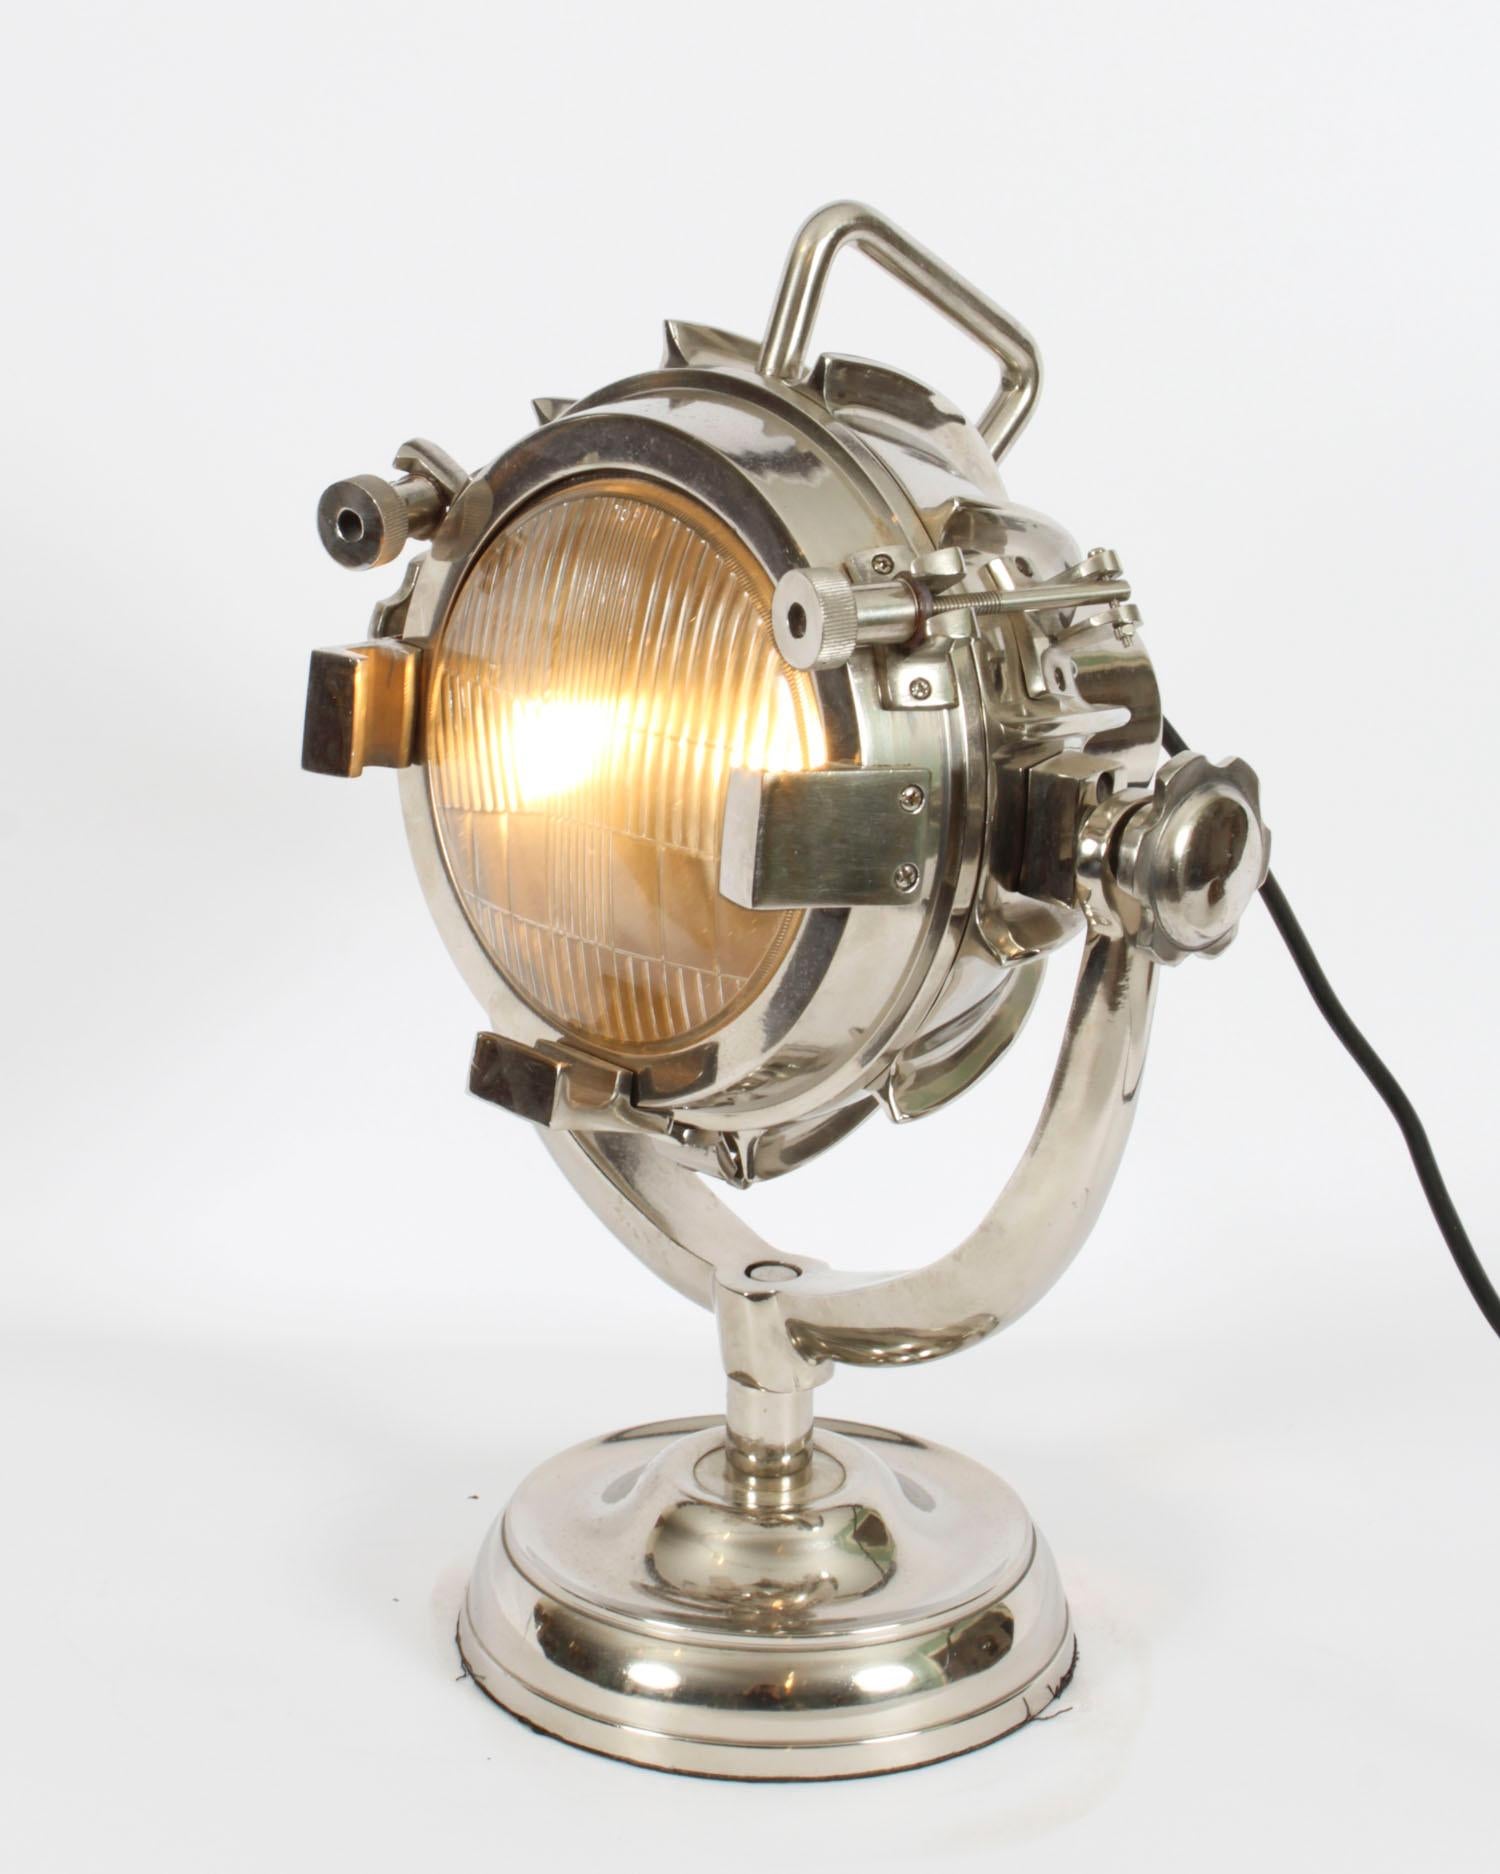 This is a highly attractive Searchlight table lamp, Mid-20th Century in date.

This splendid nautical-inspired swiveling table lamp is crafted from polished nickel.

The craftsmanship is second to none throughout all aspects of this lamp and it